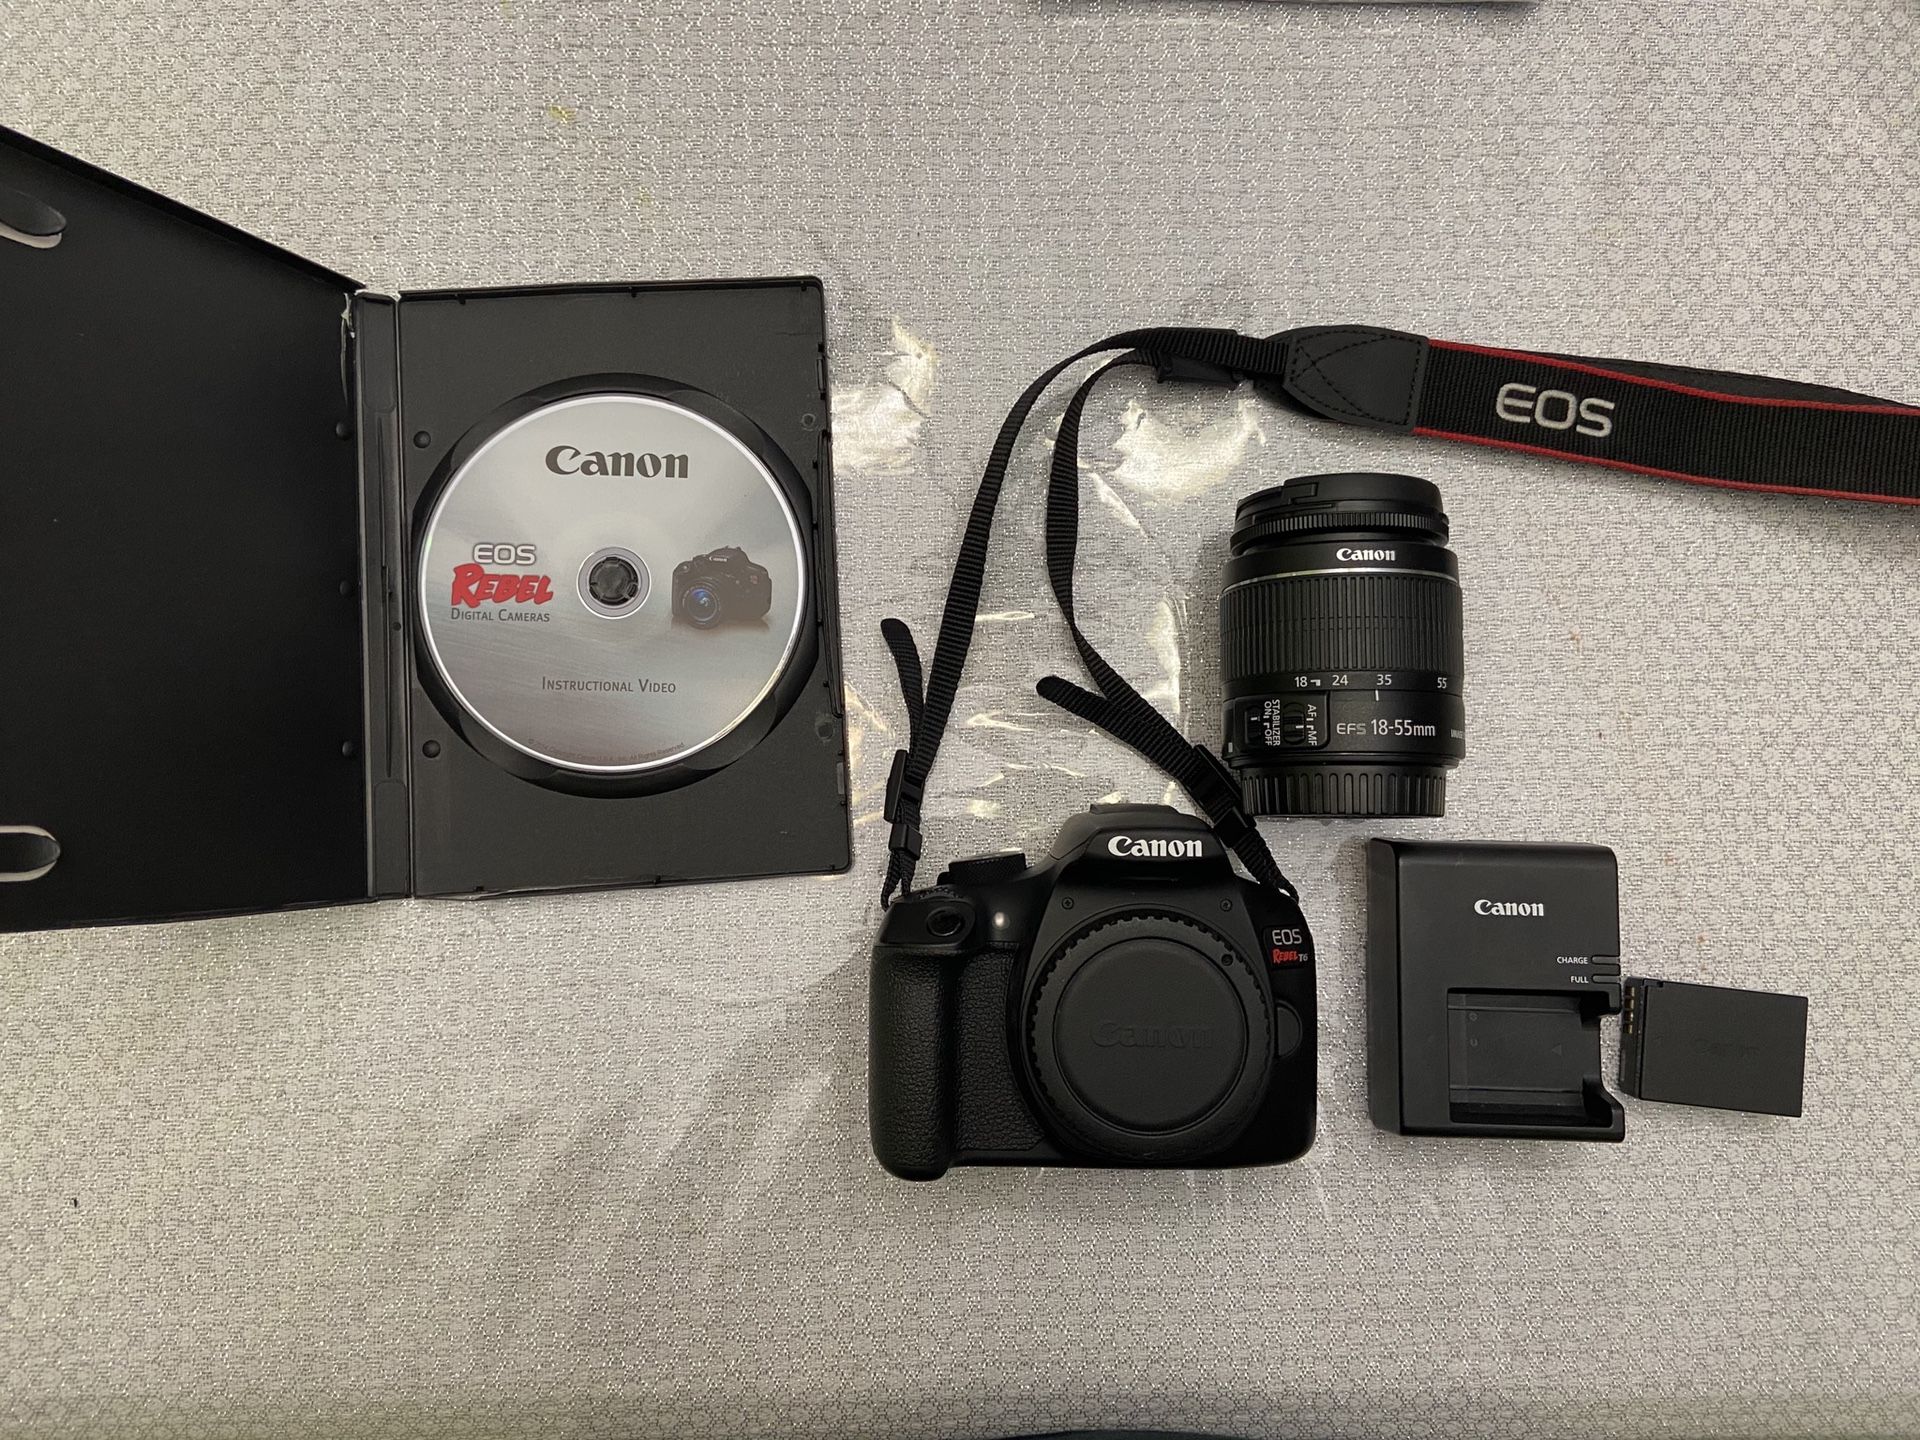 Canon rebel T6 with 18-55mm lens